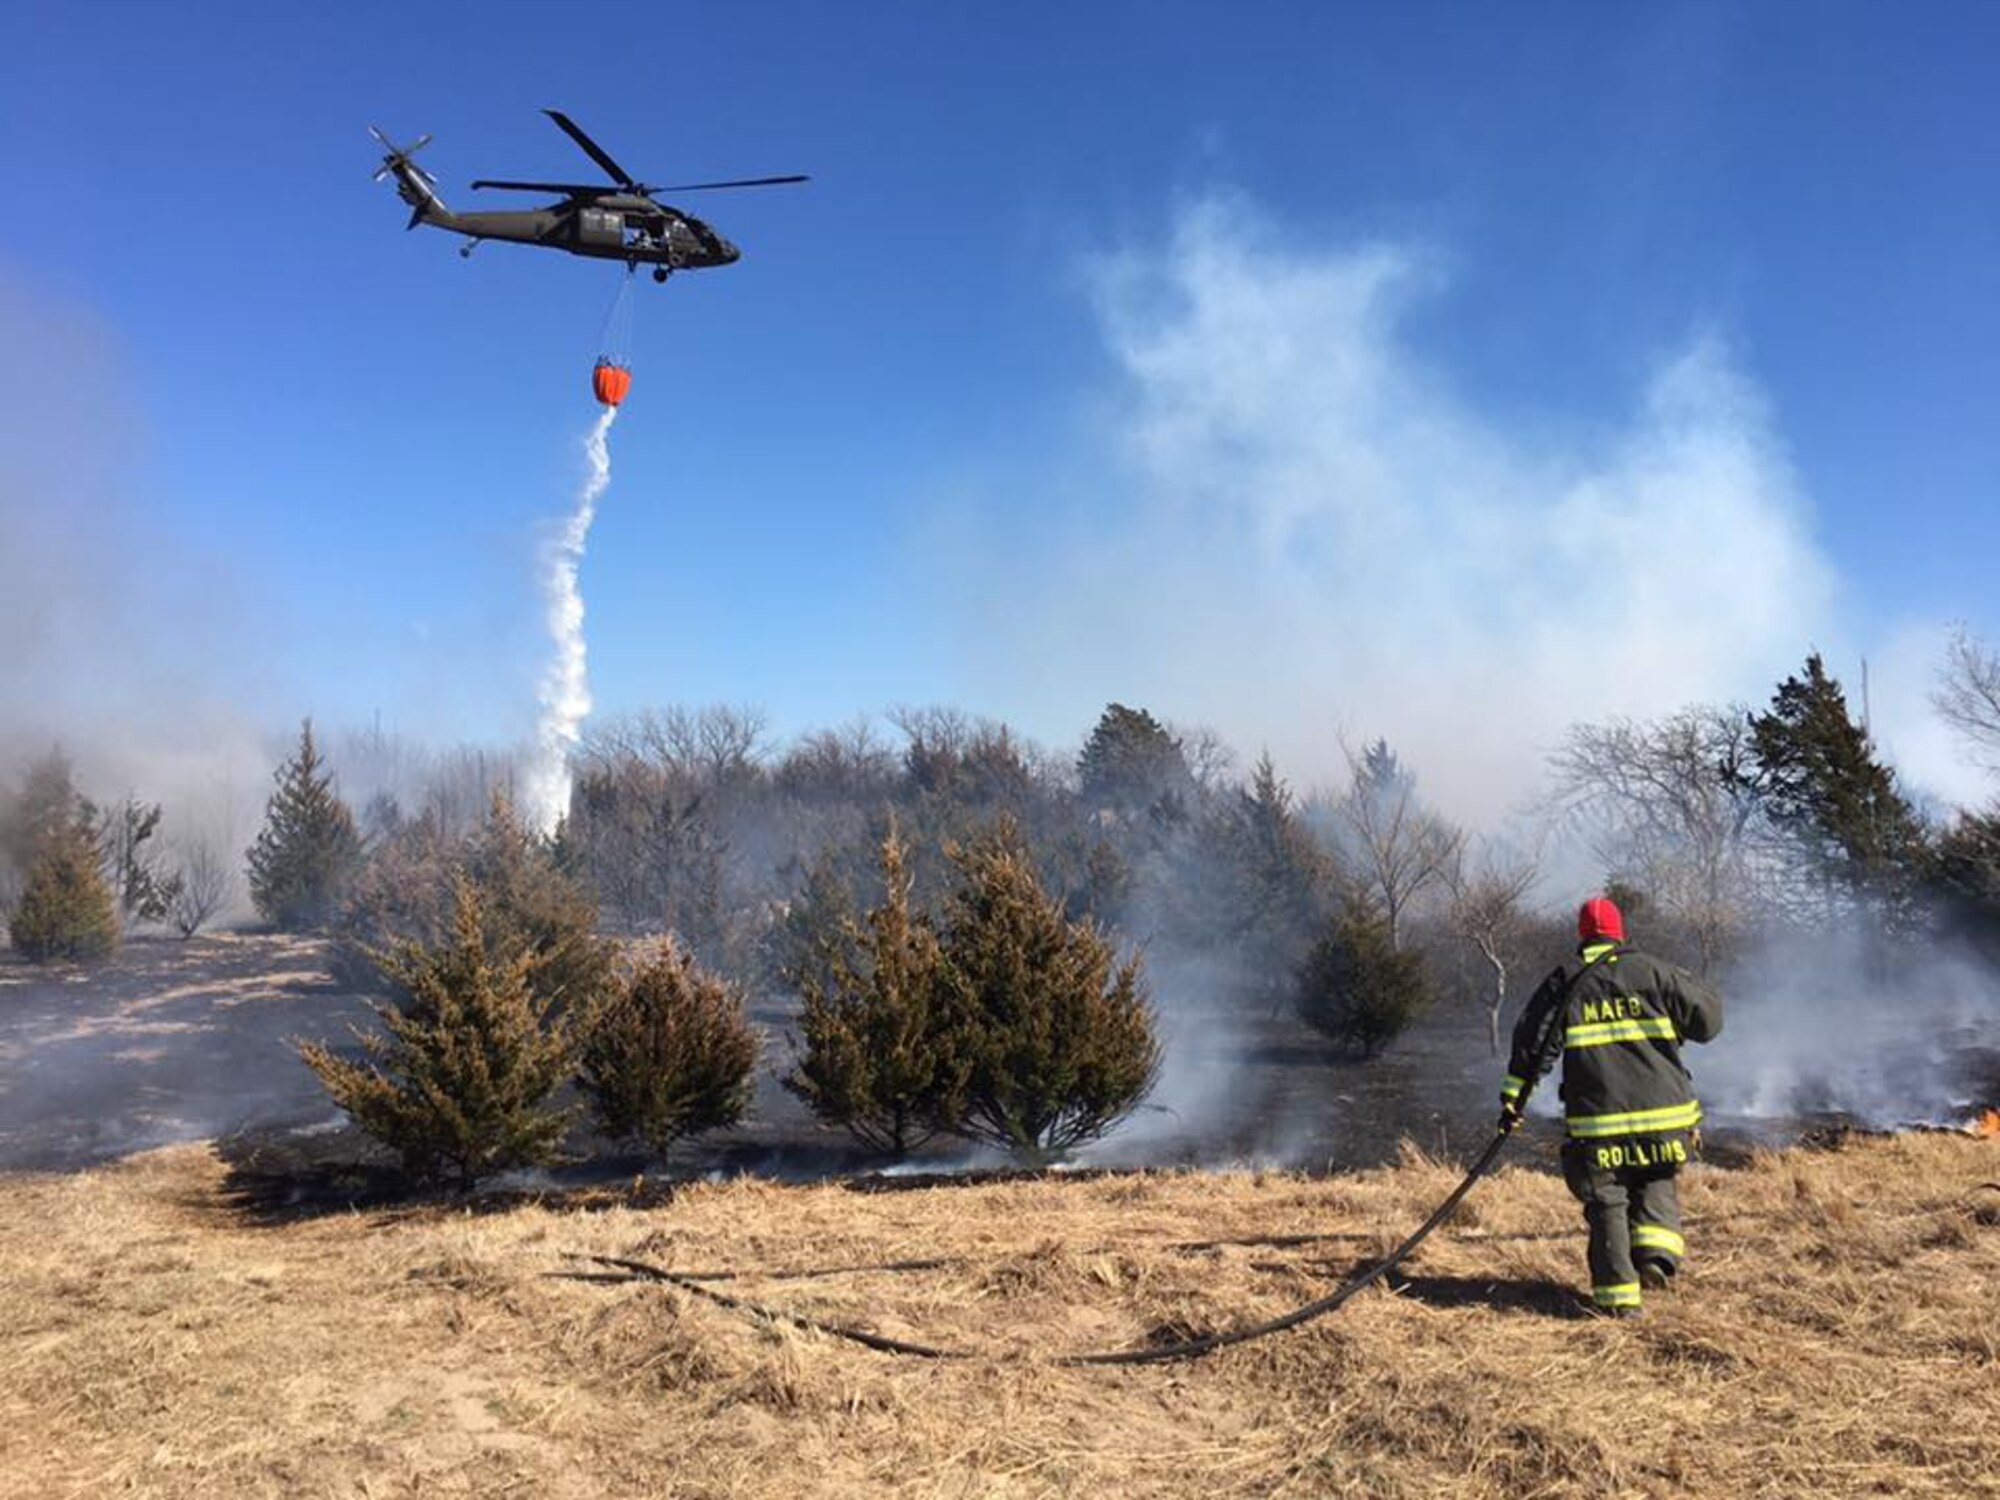 Tech. Sgt. Kyle Rollins, 22nd Civil Engineer Squadron firefighter, contains a wildfire March 7, 2016, in Reno County, Kan. Eighteen firefighters from McConnell Air Force Base responded to the fire to aid the local fire departments. (Courtesy photo)